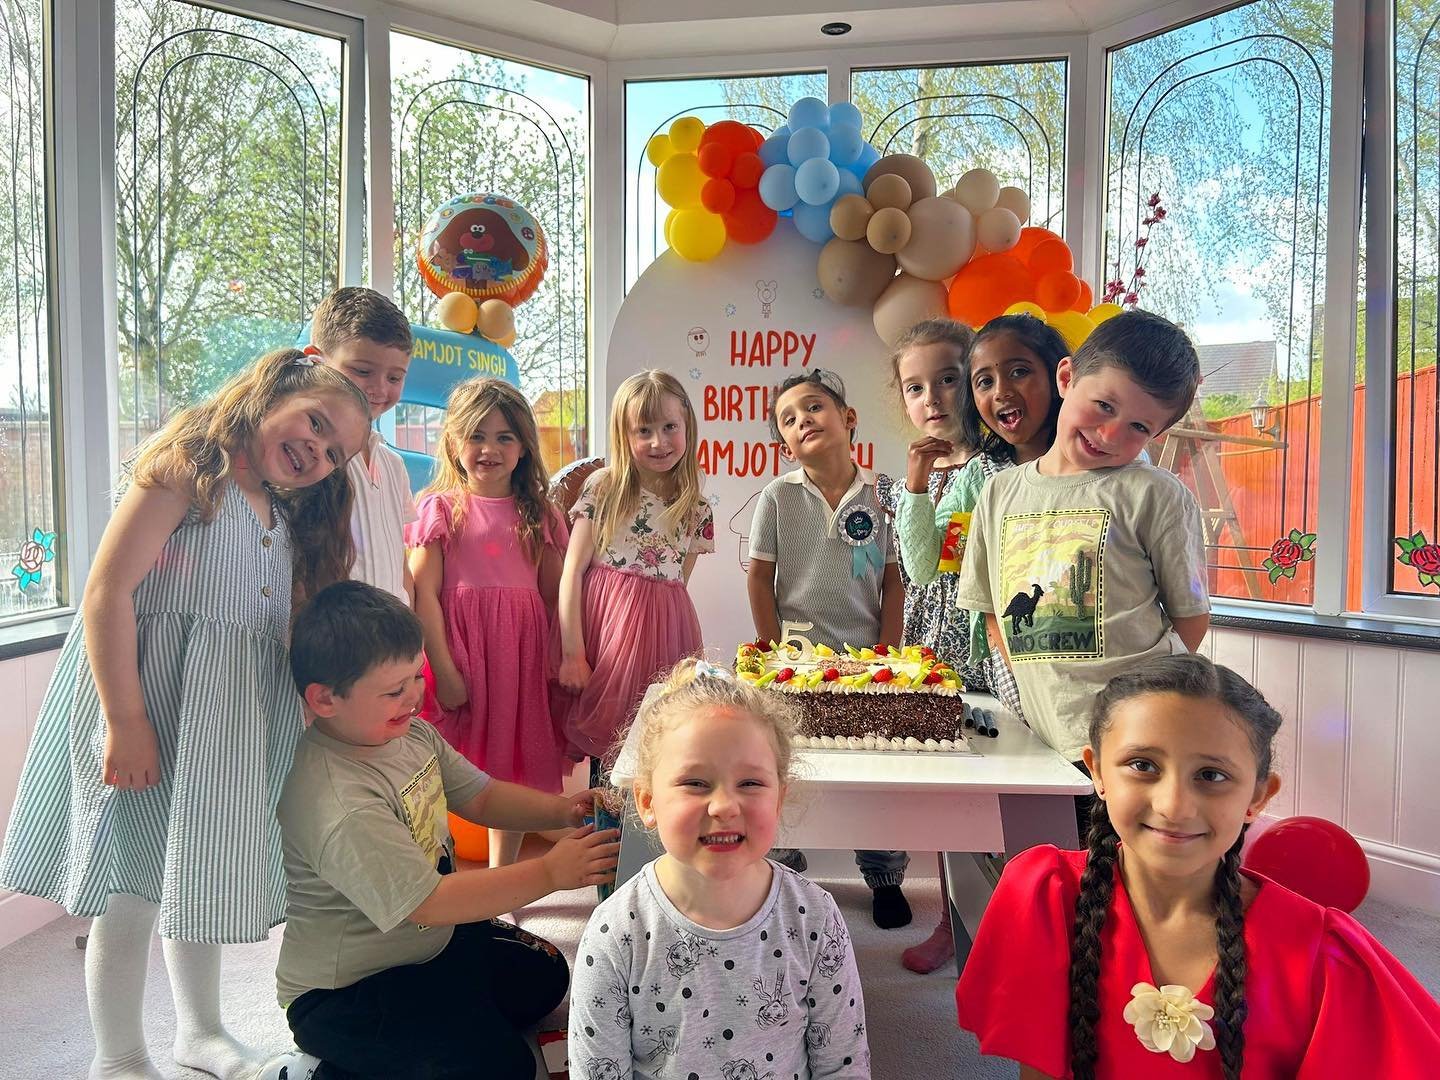 Did you know we also cater to smaller house gatherings? 🏡🥳🎂

Ekamjot invited us to his house to celebrate his 5th birthday with his friends! 🎂 

#childrensentertainment #teesside #kidspartyideas